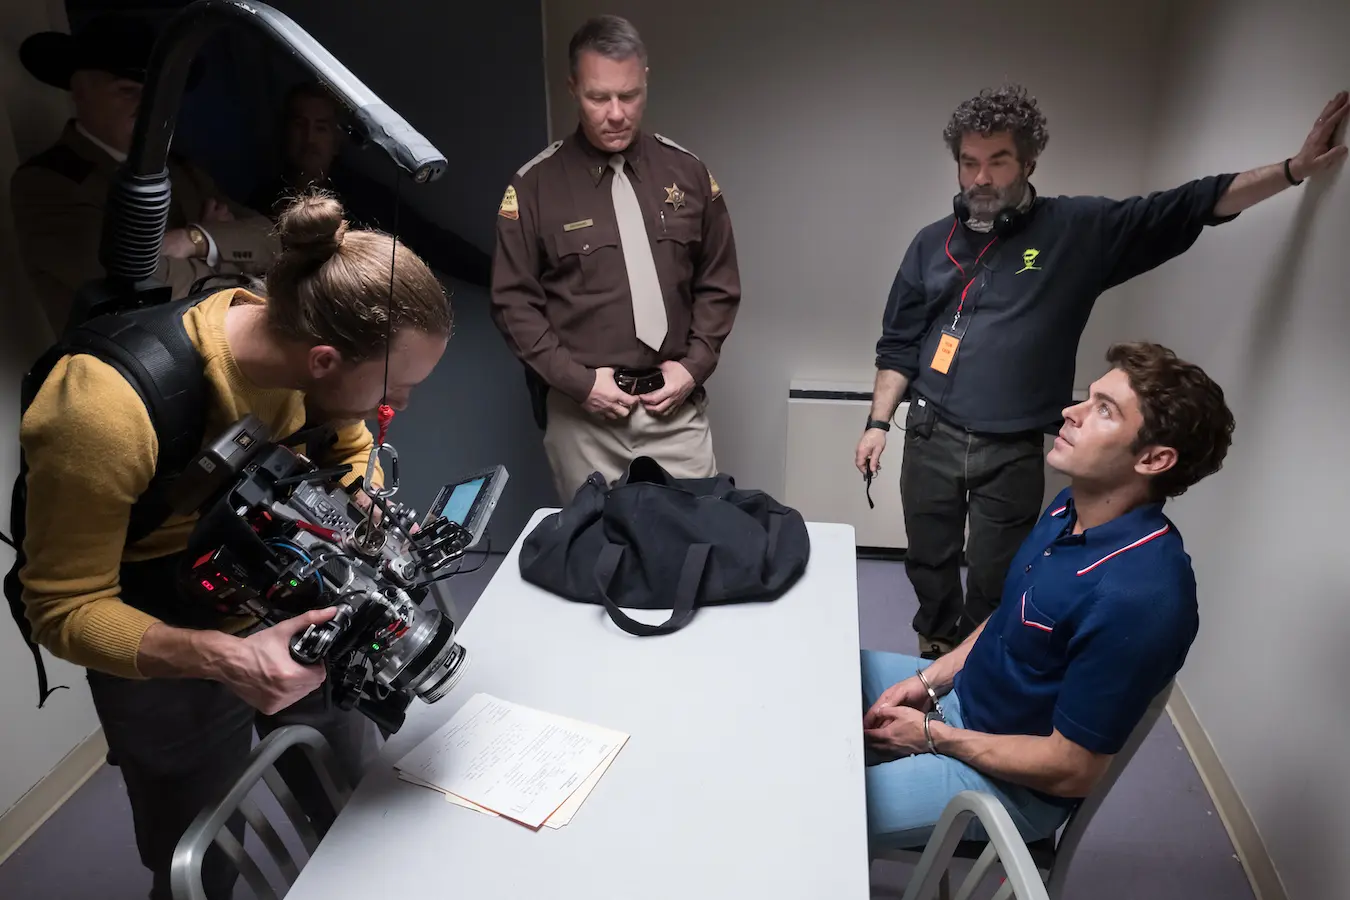 Joe Berlinger on the set of Extremely Wicked, Shockingly Evil and Vile